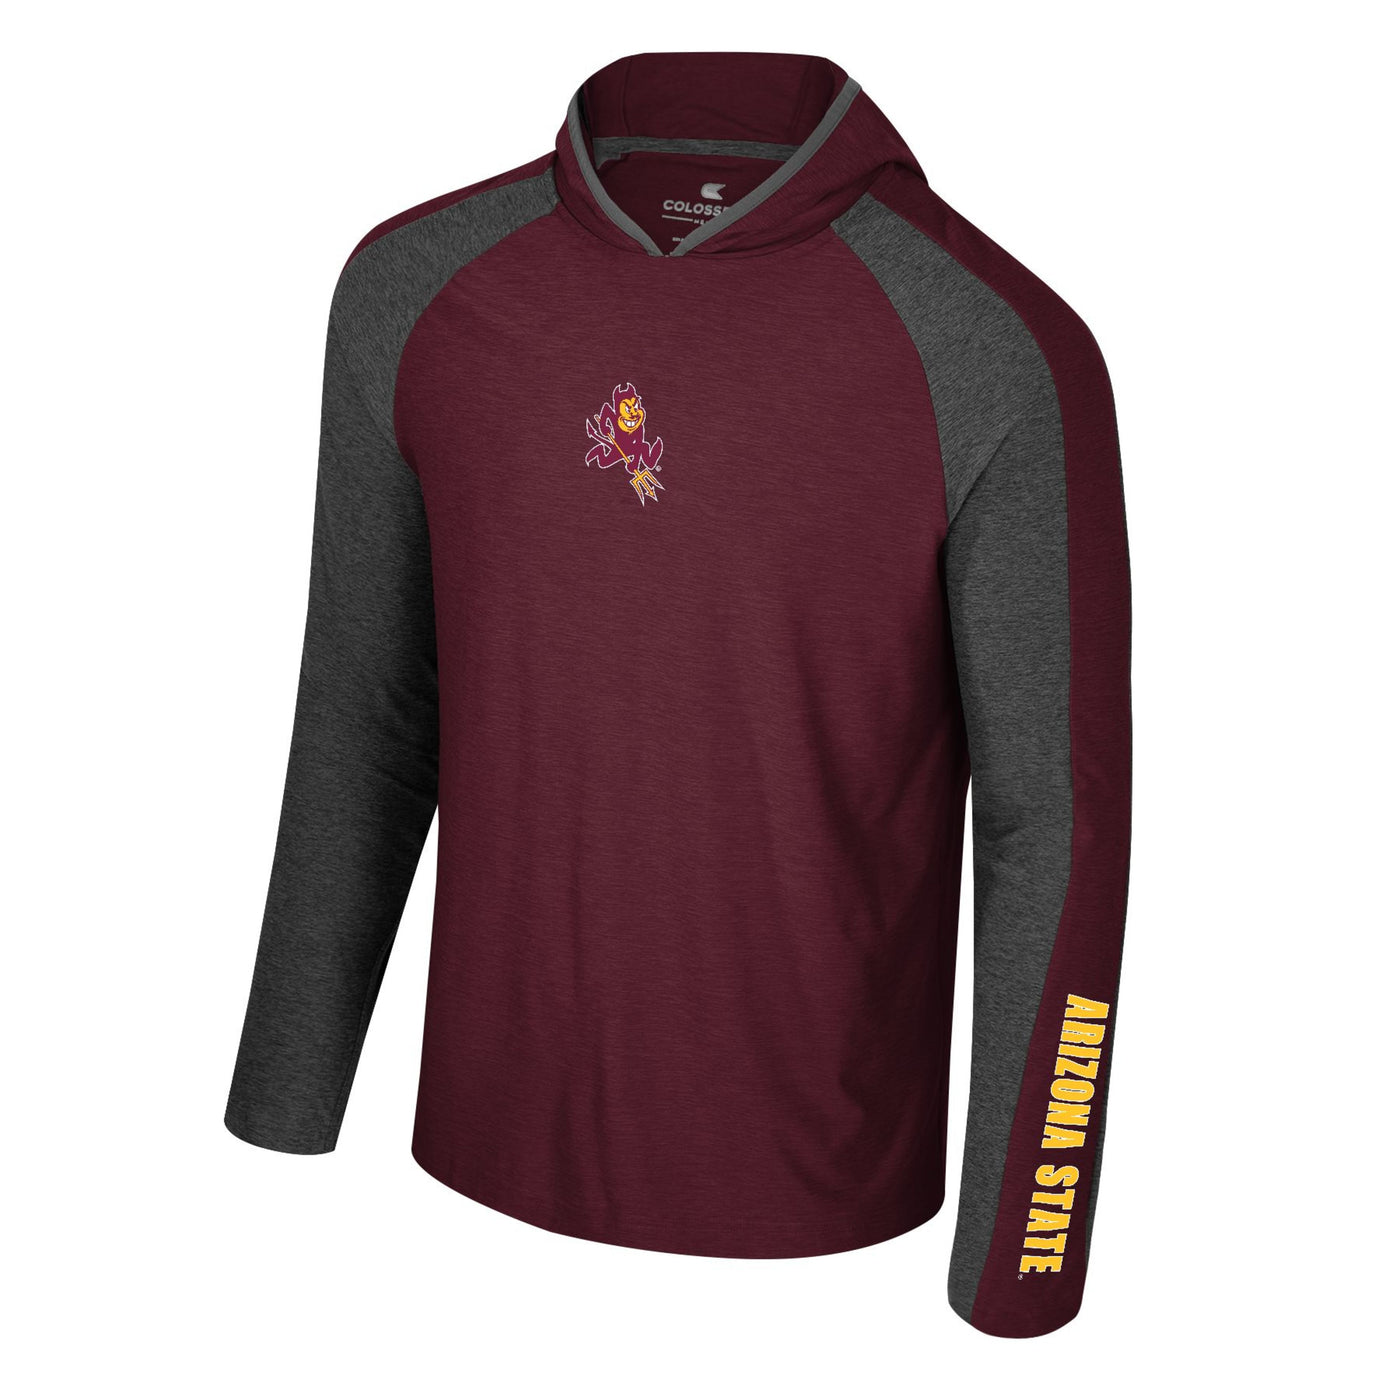 ASU maroon hooded pullover with grey sleeves and a thick maroon stripe down the sleeves as well. The text on the left arm is 